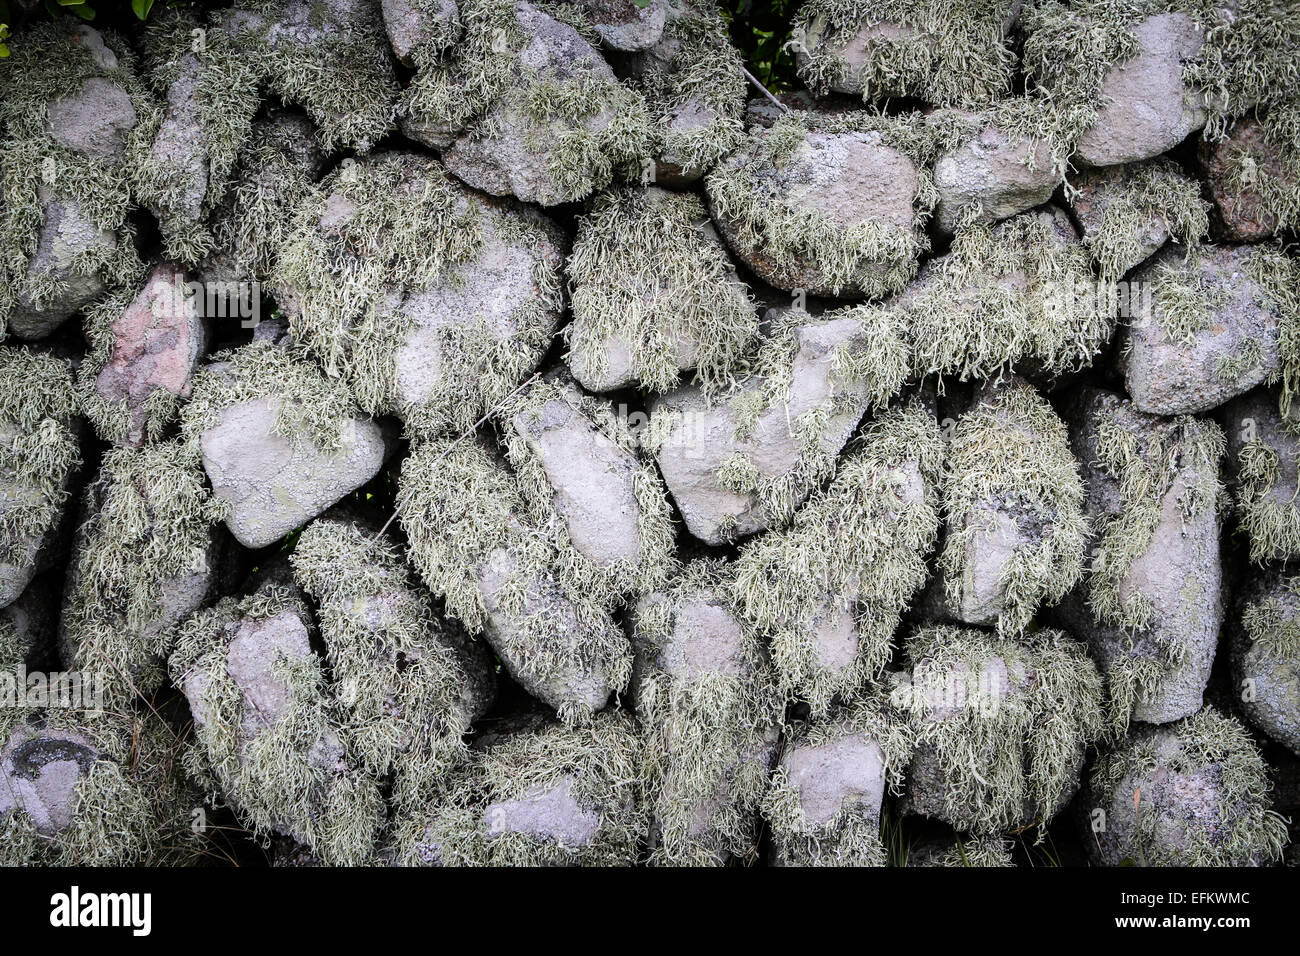 Detail of dry stone wall covered in lichens Stock Photo